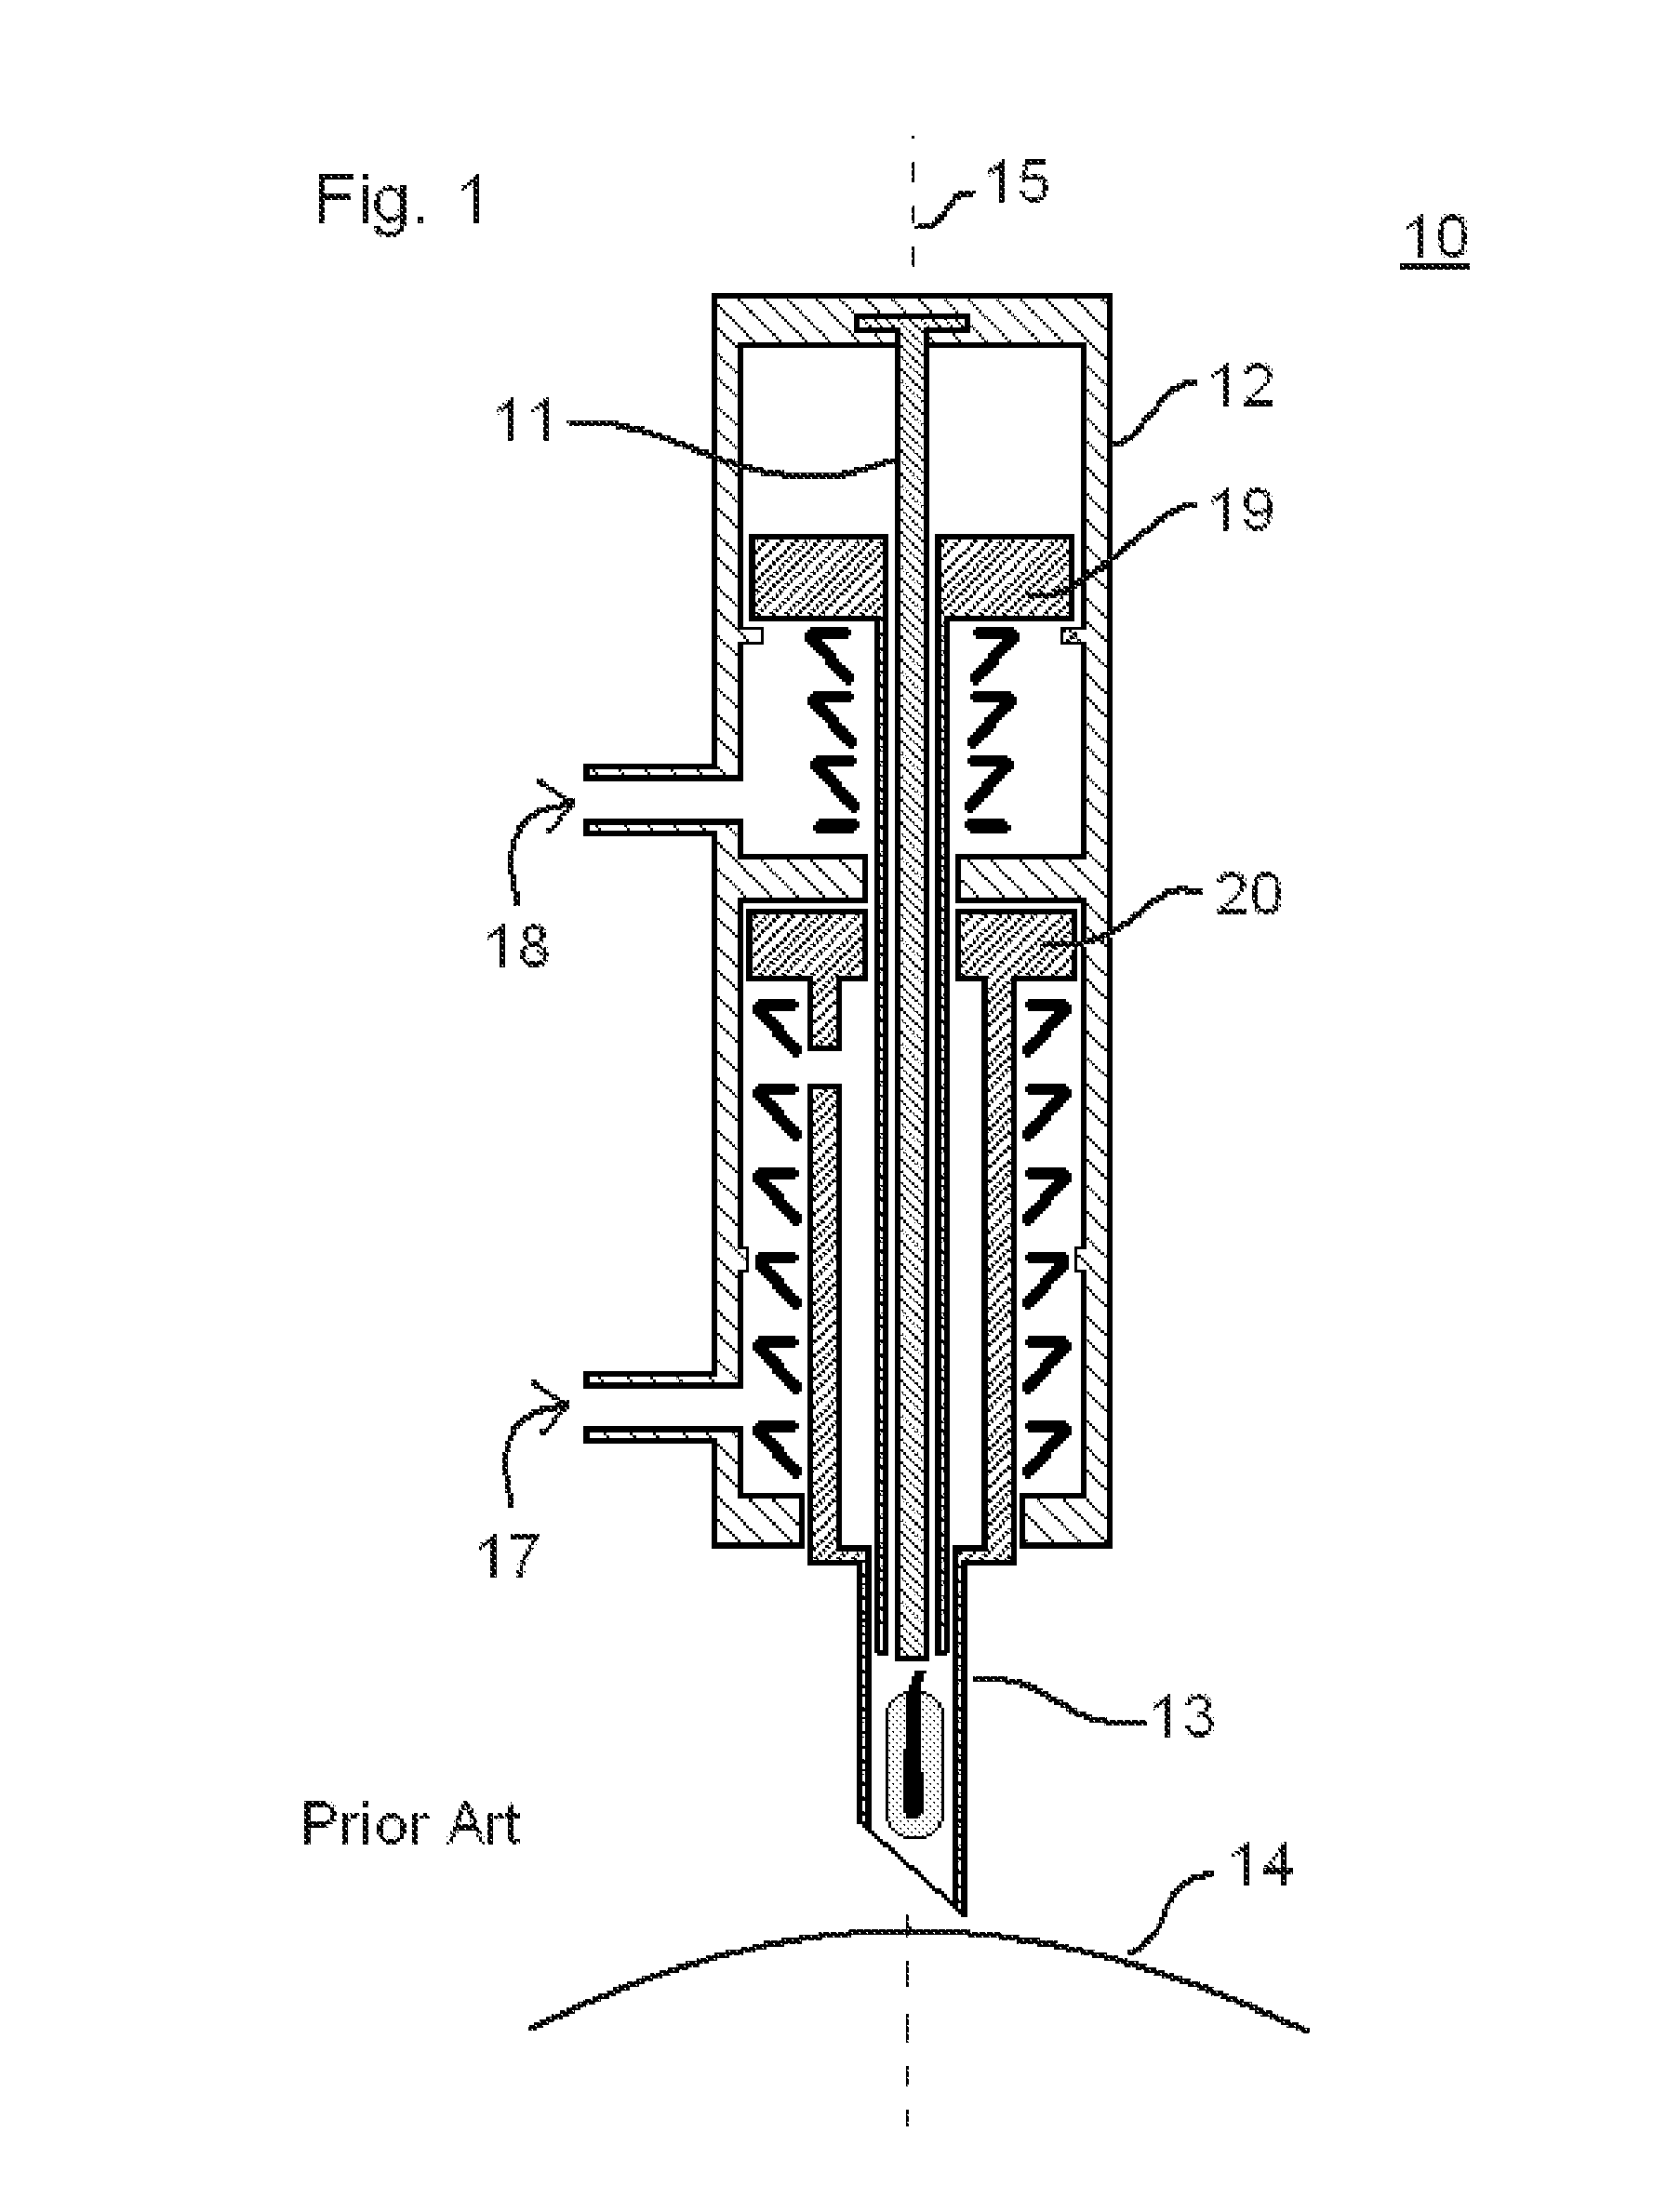 Hair implant apparatus and method for its use